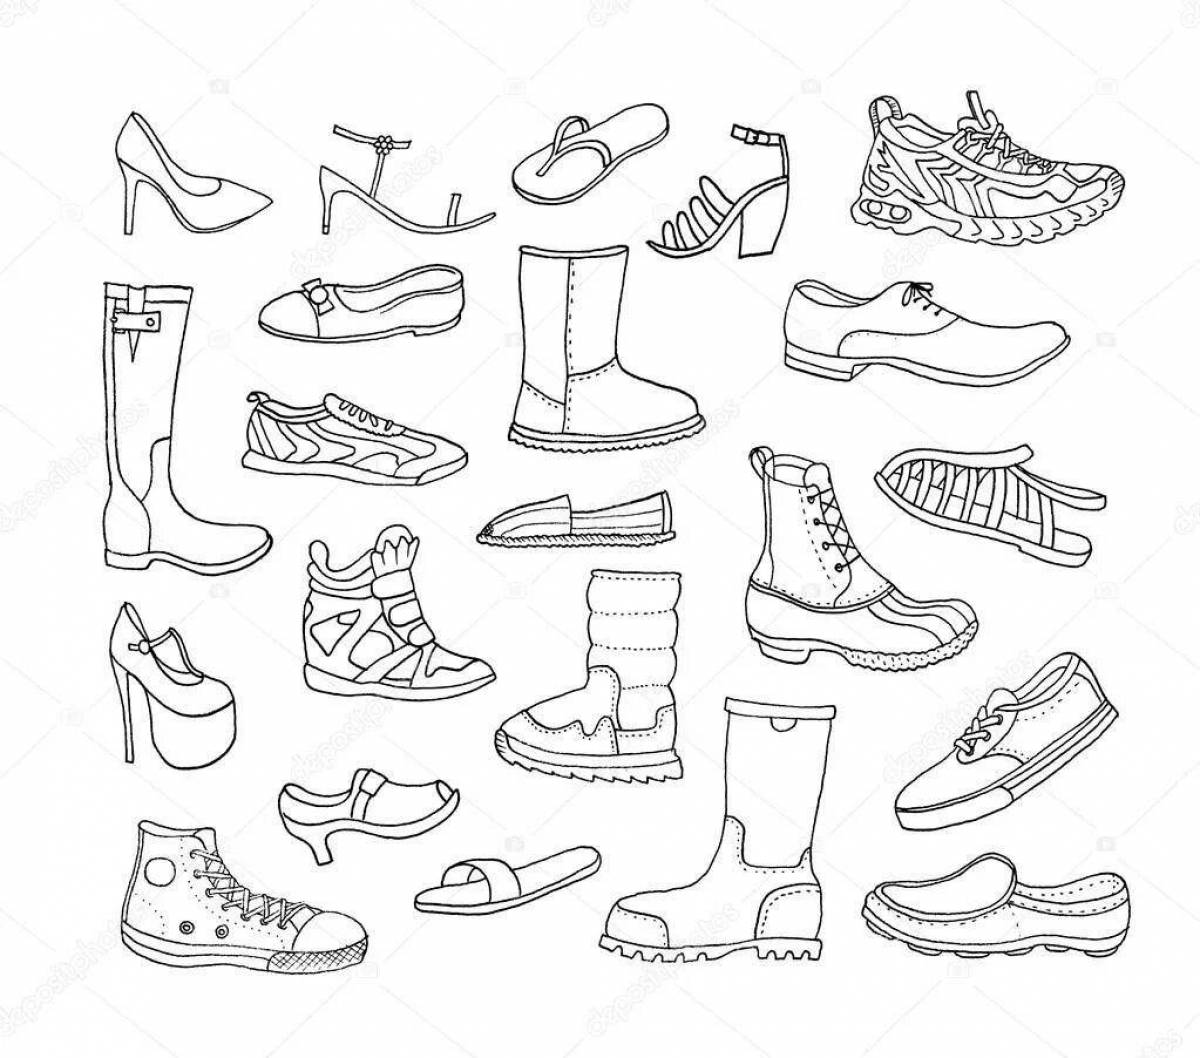 Coloring page winter shoes snug